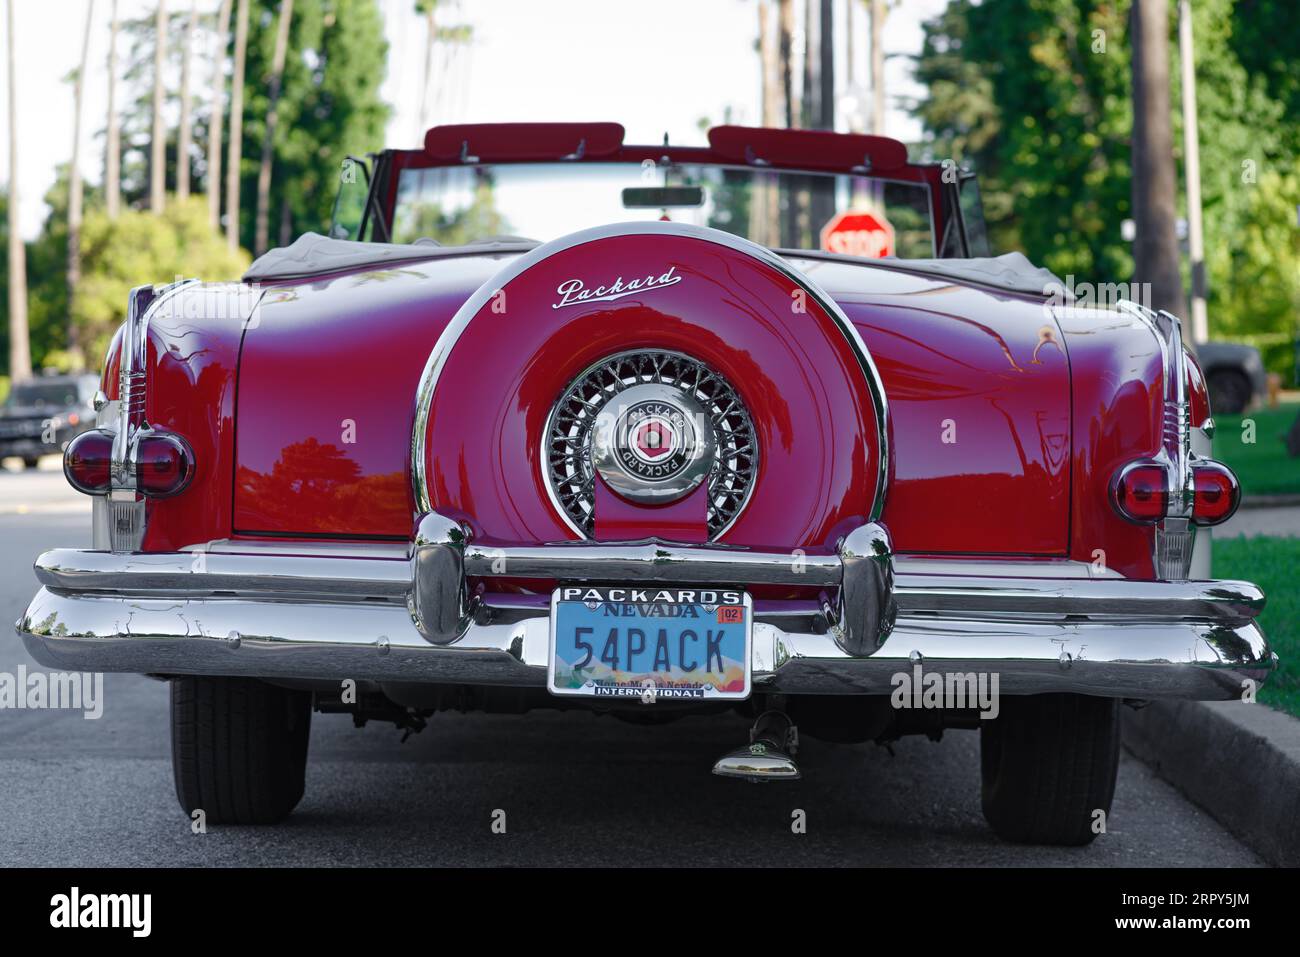 Classic car, Packard Caribbean, convertible car, rear view, shown parked in a residential area. Stock Photo